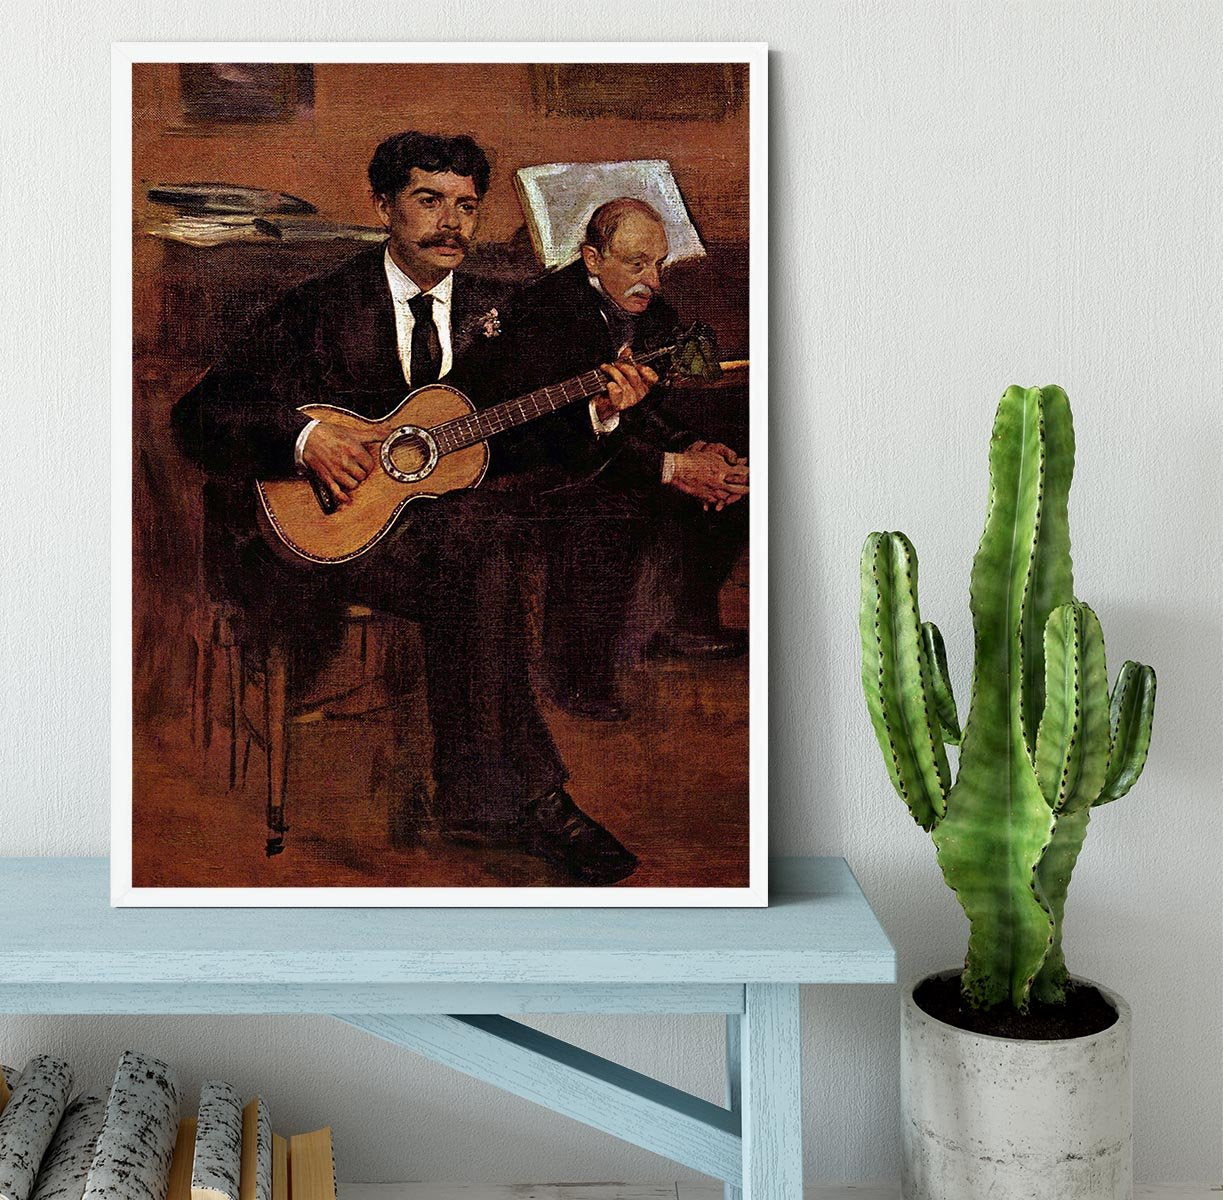 The guitarist Pagans and Monsieur Degas by Manet Framed Print - Canvas Art Rocks -6